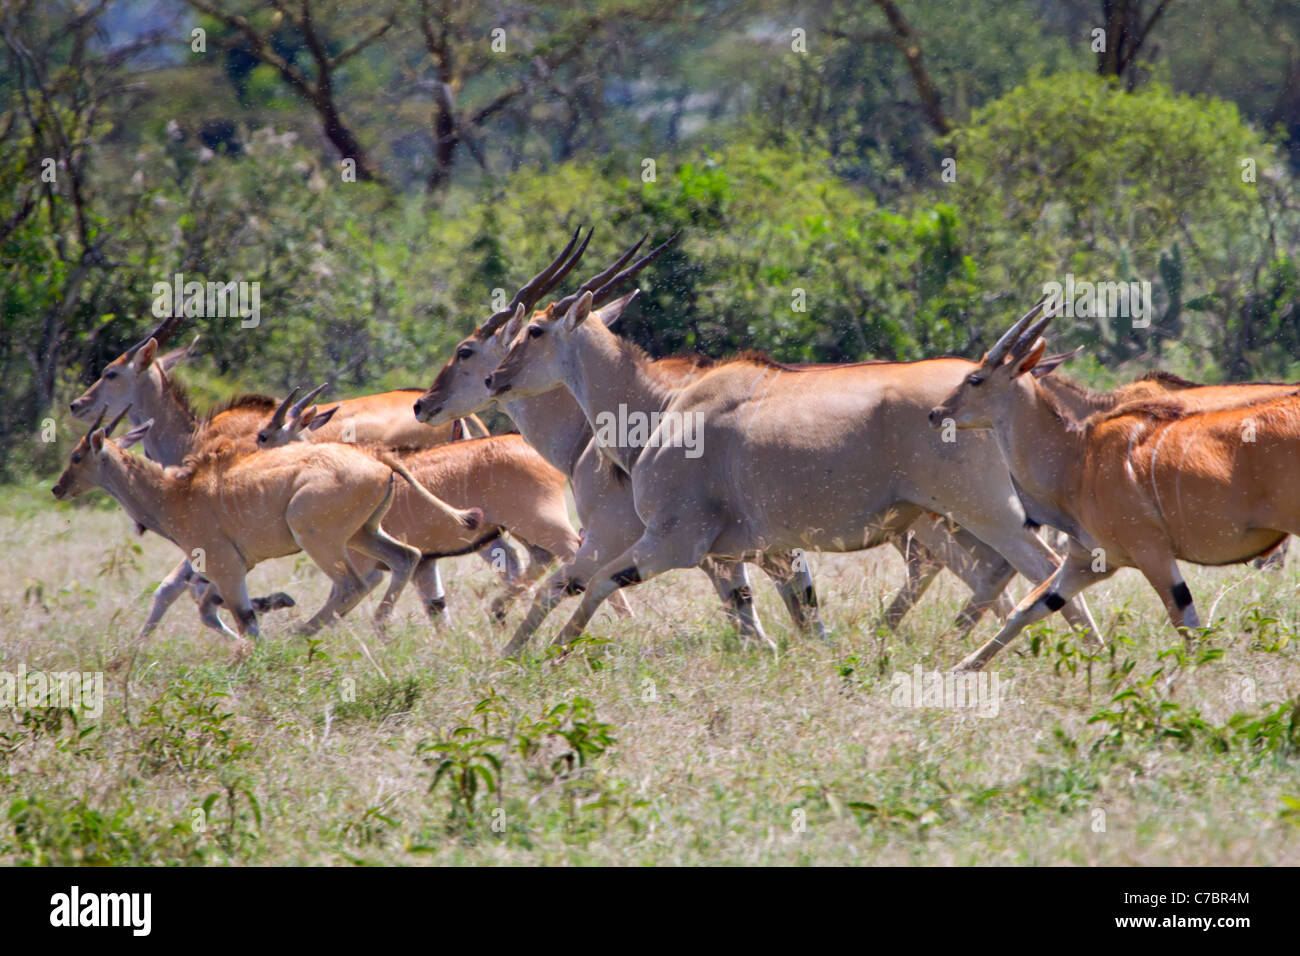 The common eland antelopes (Taurotragus oryx) running in the cloud of blood-suckling insects, centyral Kenya. Stock Photo